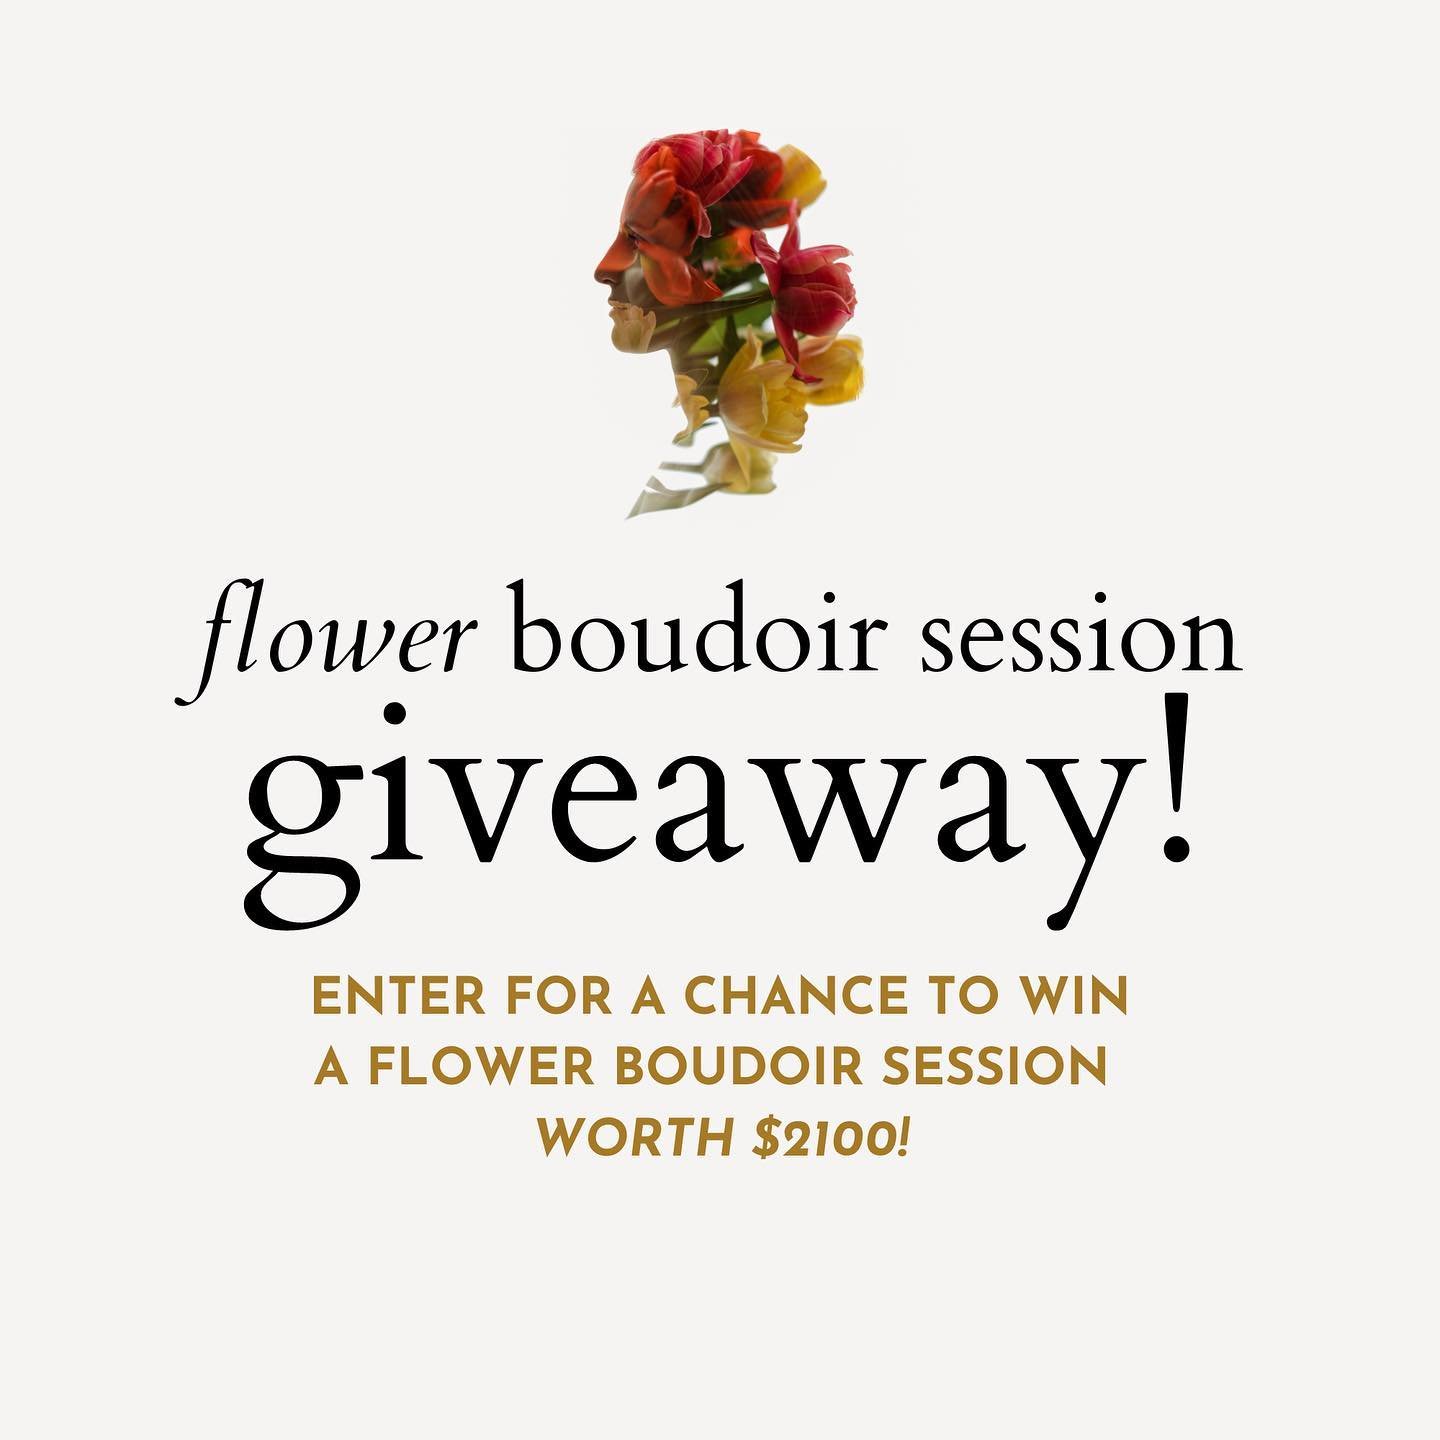 My studio Flower Party is this Sunday 5/19, and I decided that the occasion calls for a giveaway!! So, I&rsquo;m raffling off a *flower boudoir session* worth $2100! Swipe for details on how to enter - you can get entries here on instagram, or in per